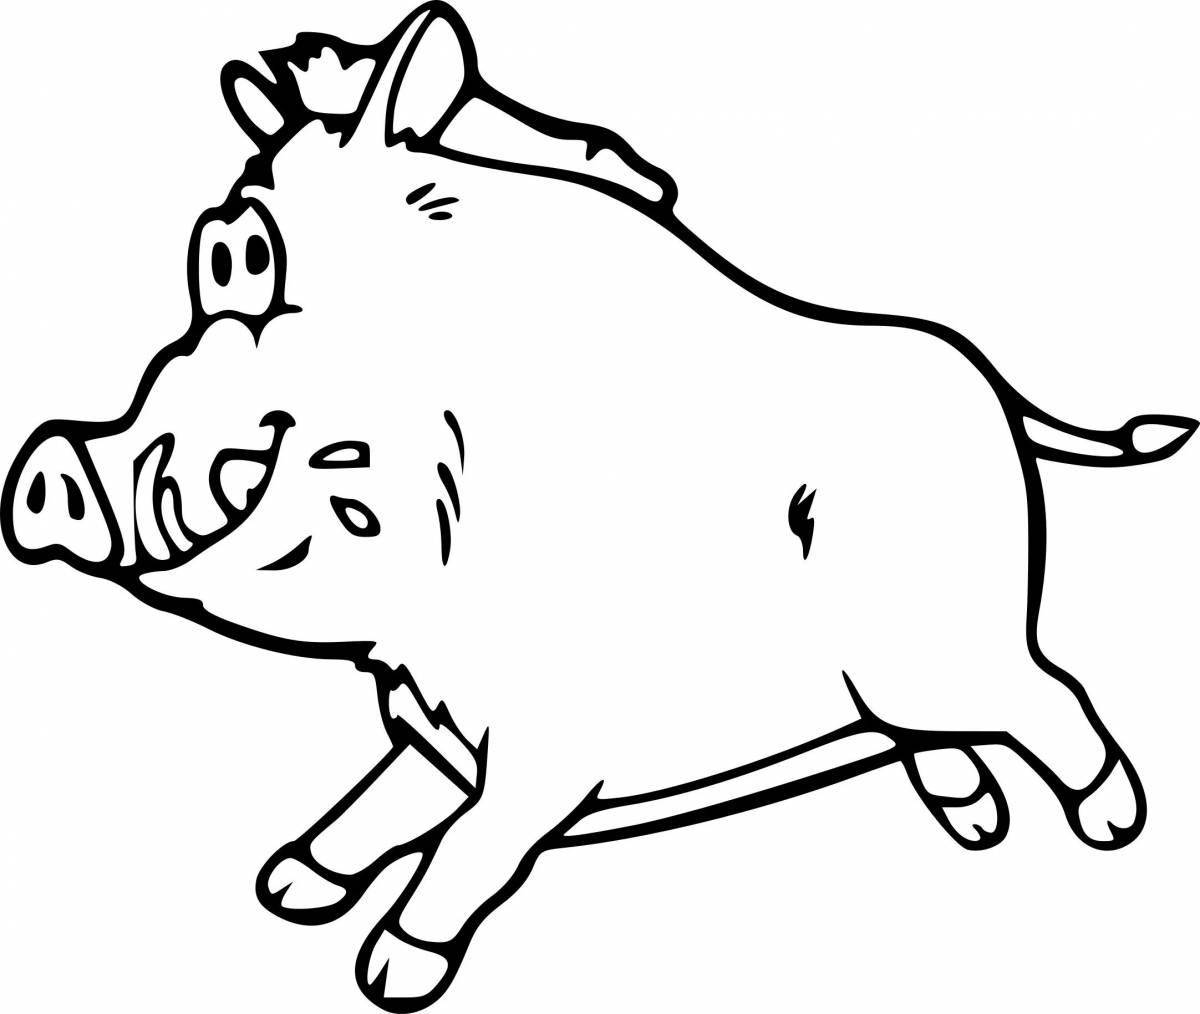 Coloring page playful boar